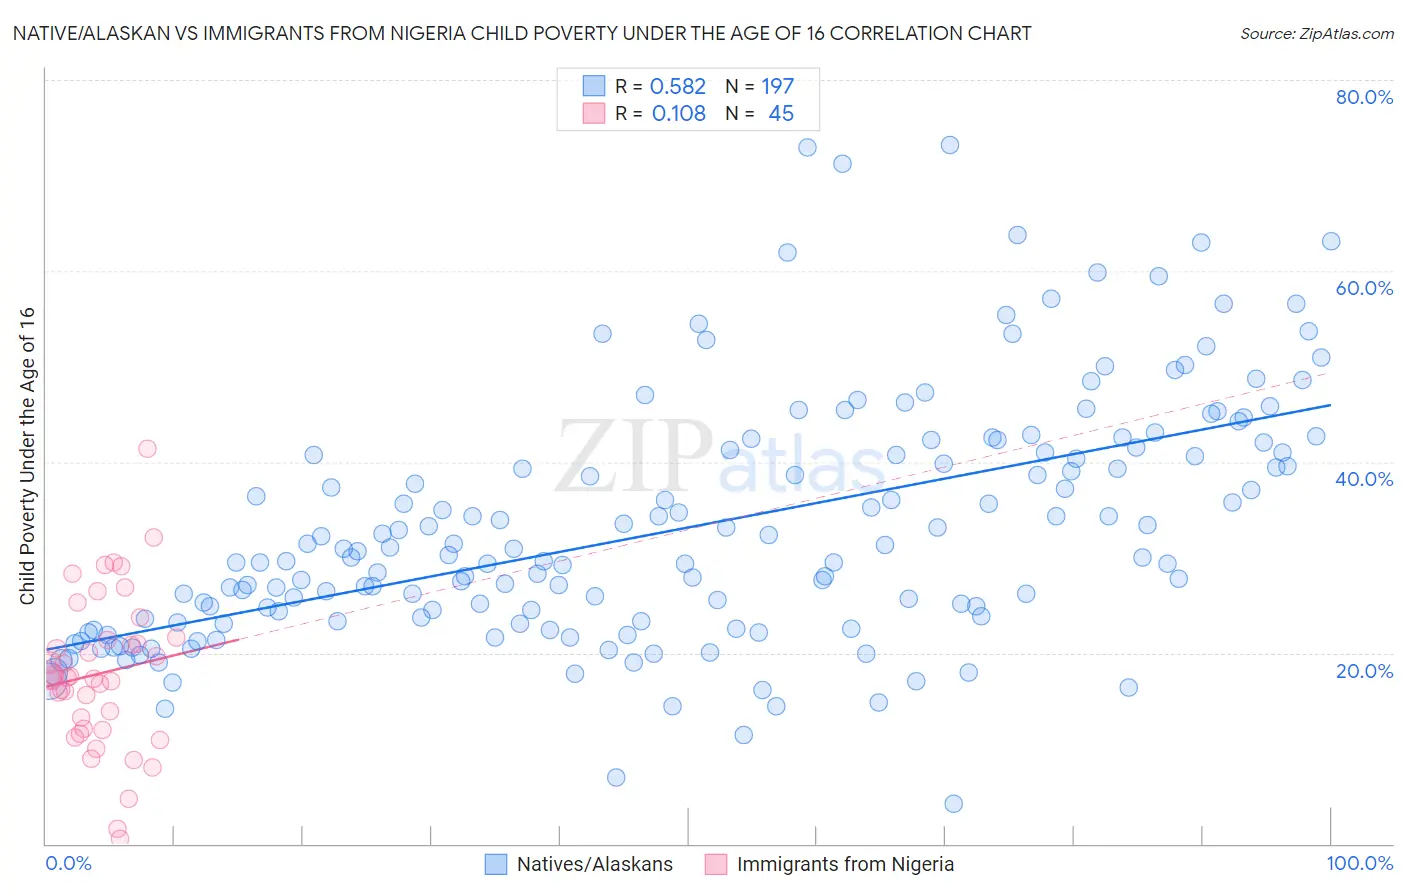 Native/Alaskan vs Immigrants from Nigeria Child Poverty Under the Age of 16